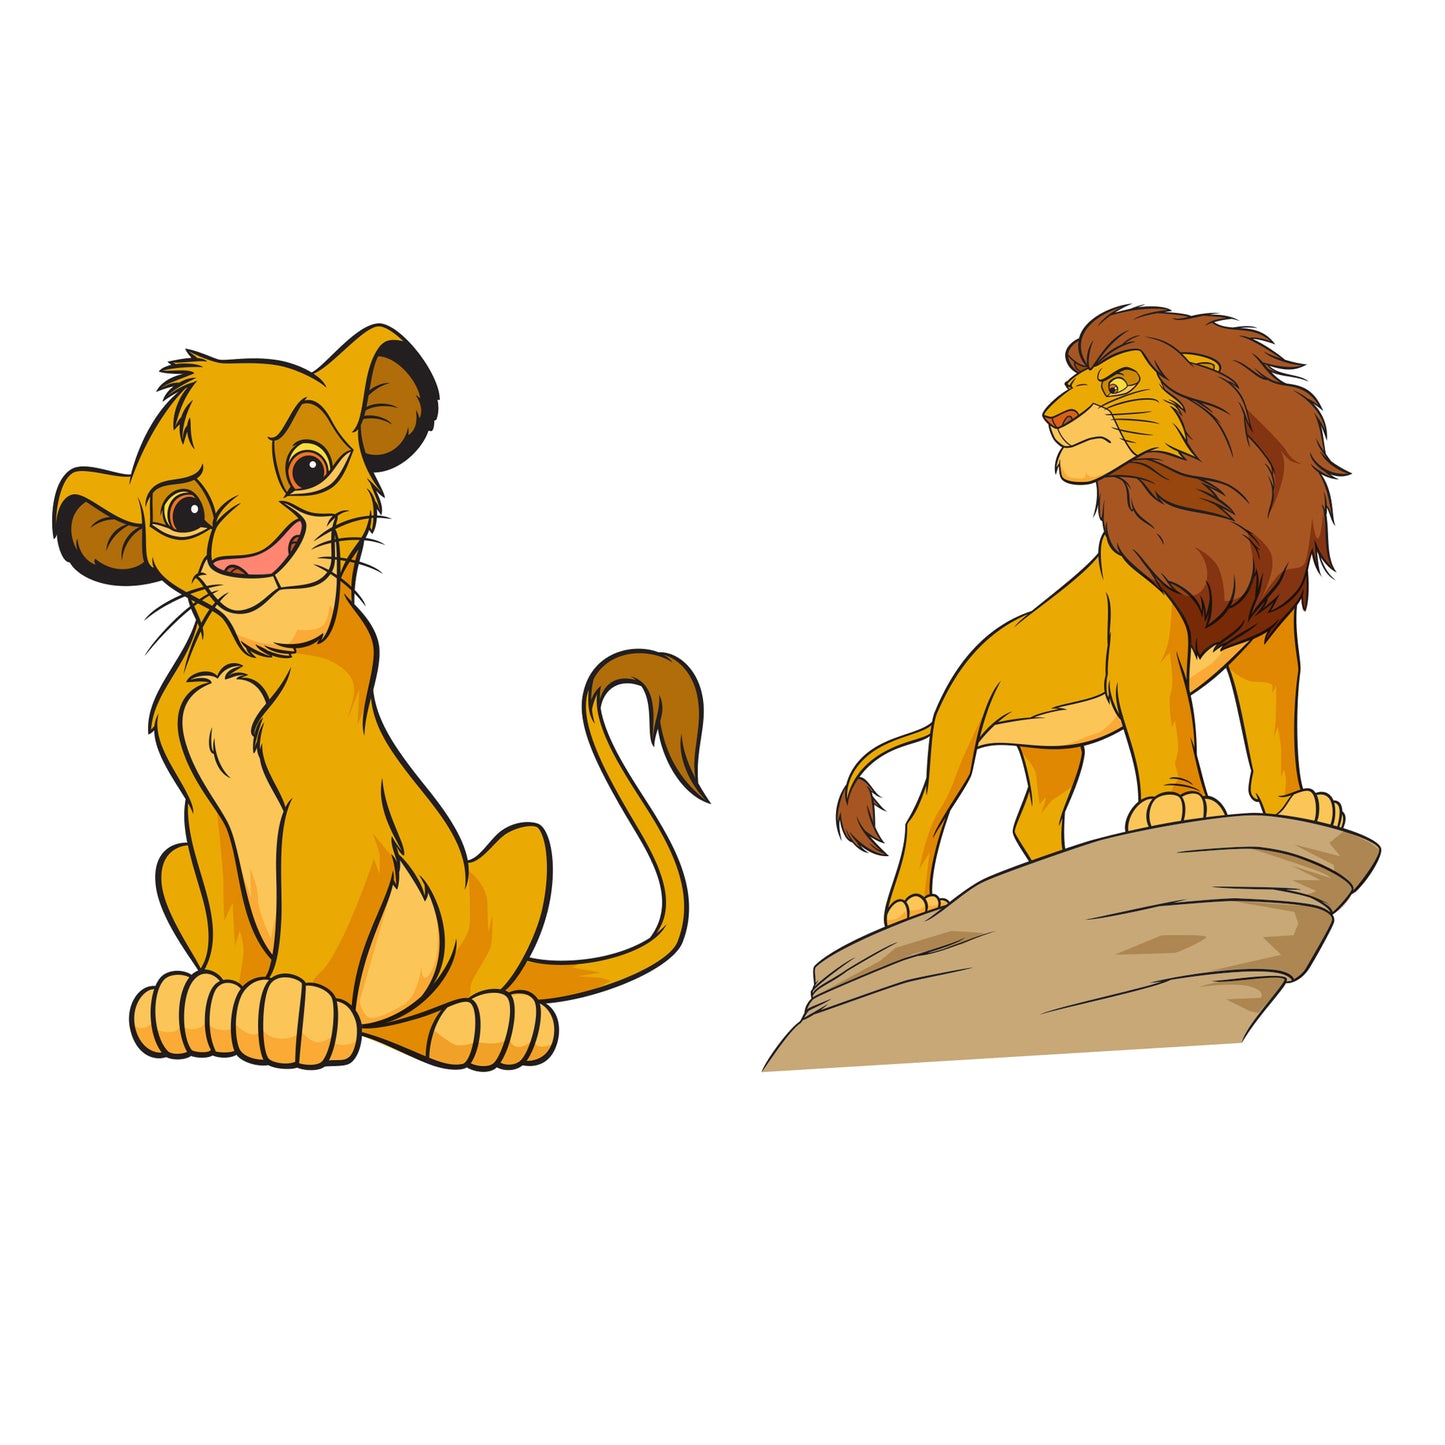 Sheet of 4 -Lion King: Simba Minis        - Officially Licensed Disney Removable Wall   Adhesive Decal